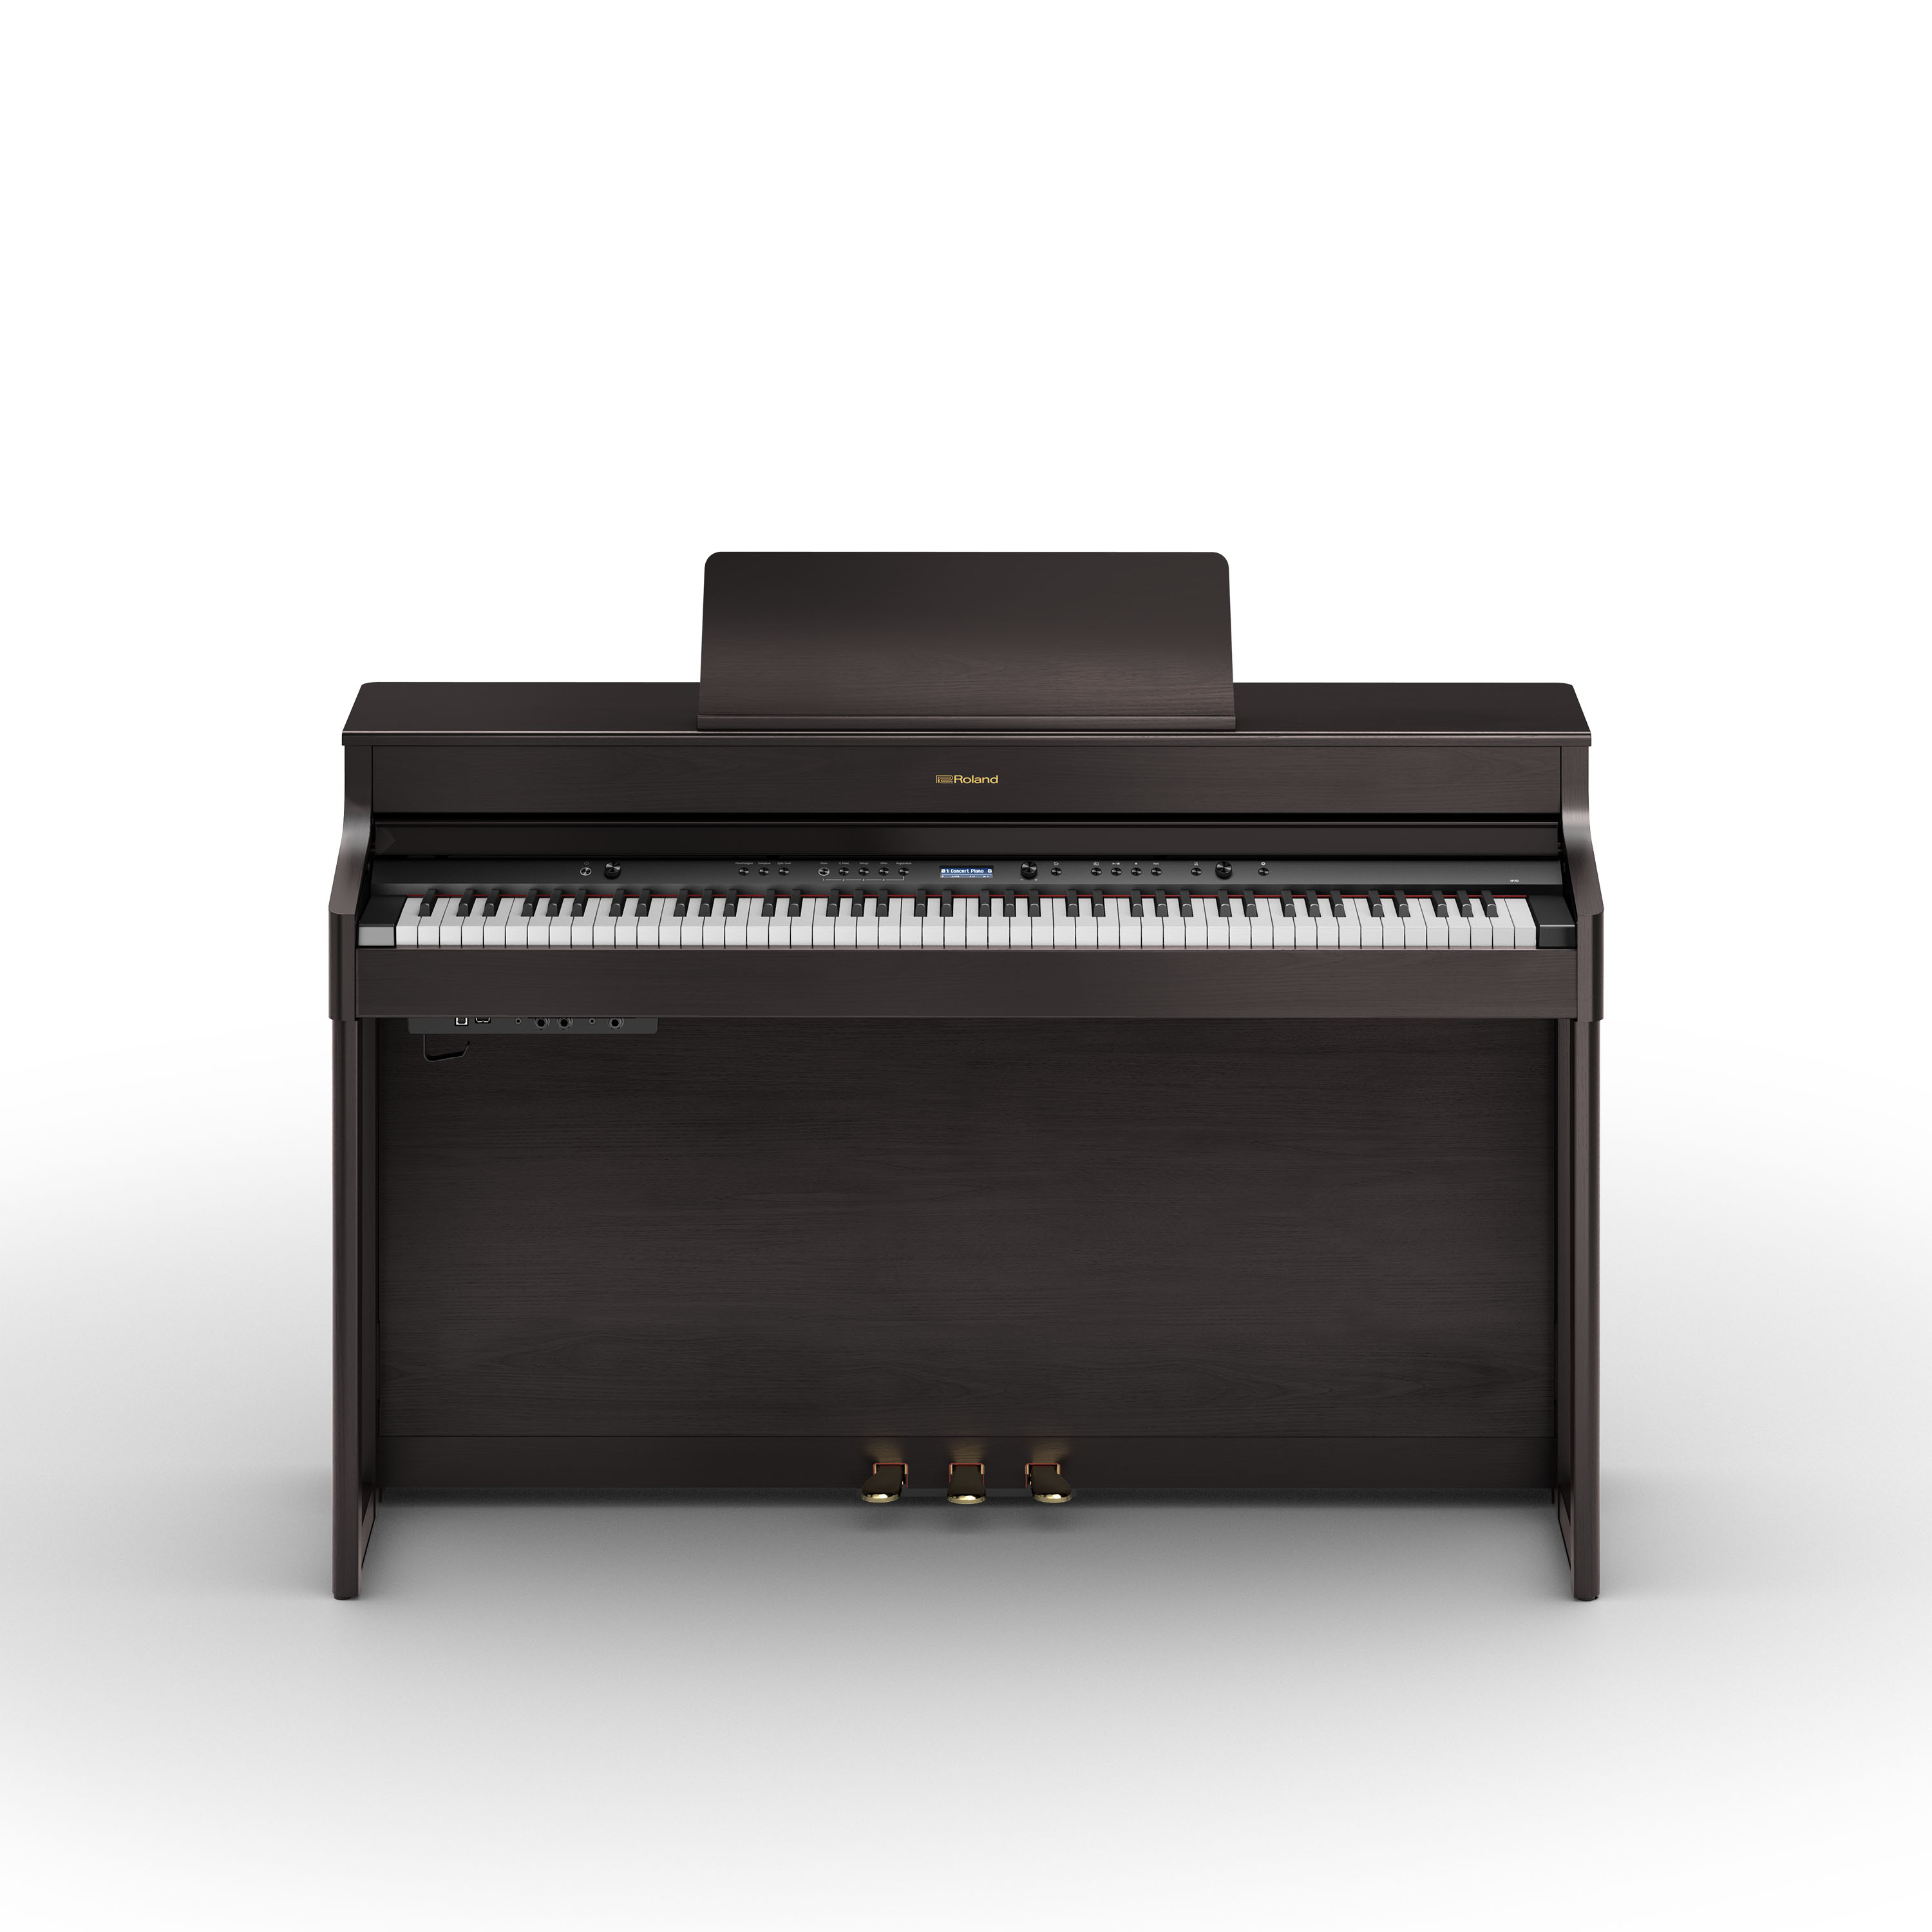 Roland Hp 702 Dr Rosewood - Piano digital con mueble - Variation 1